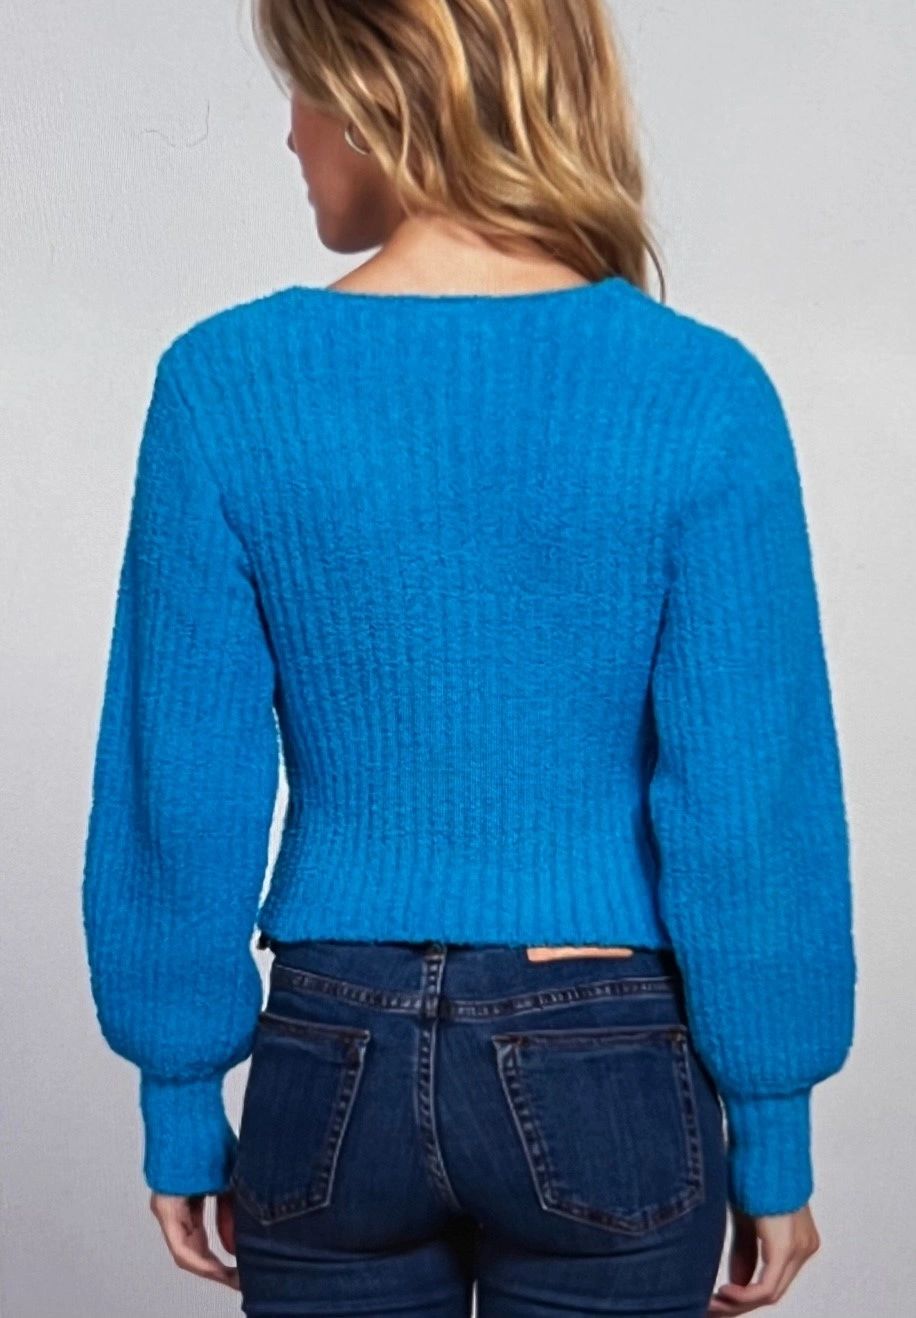 The Robin Sweater - Soft V Neck Long Puffed Sleeve Sweater